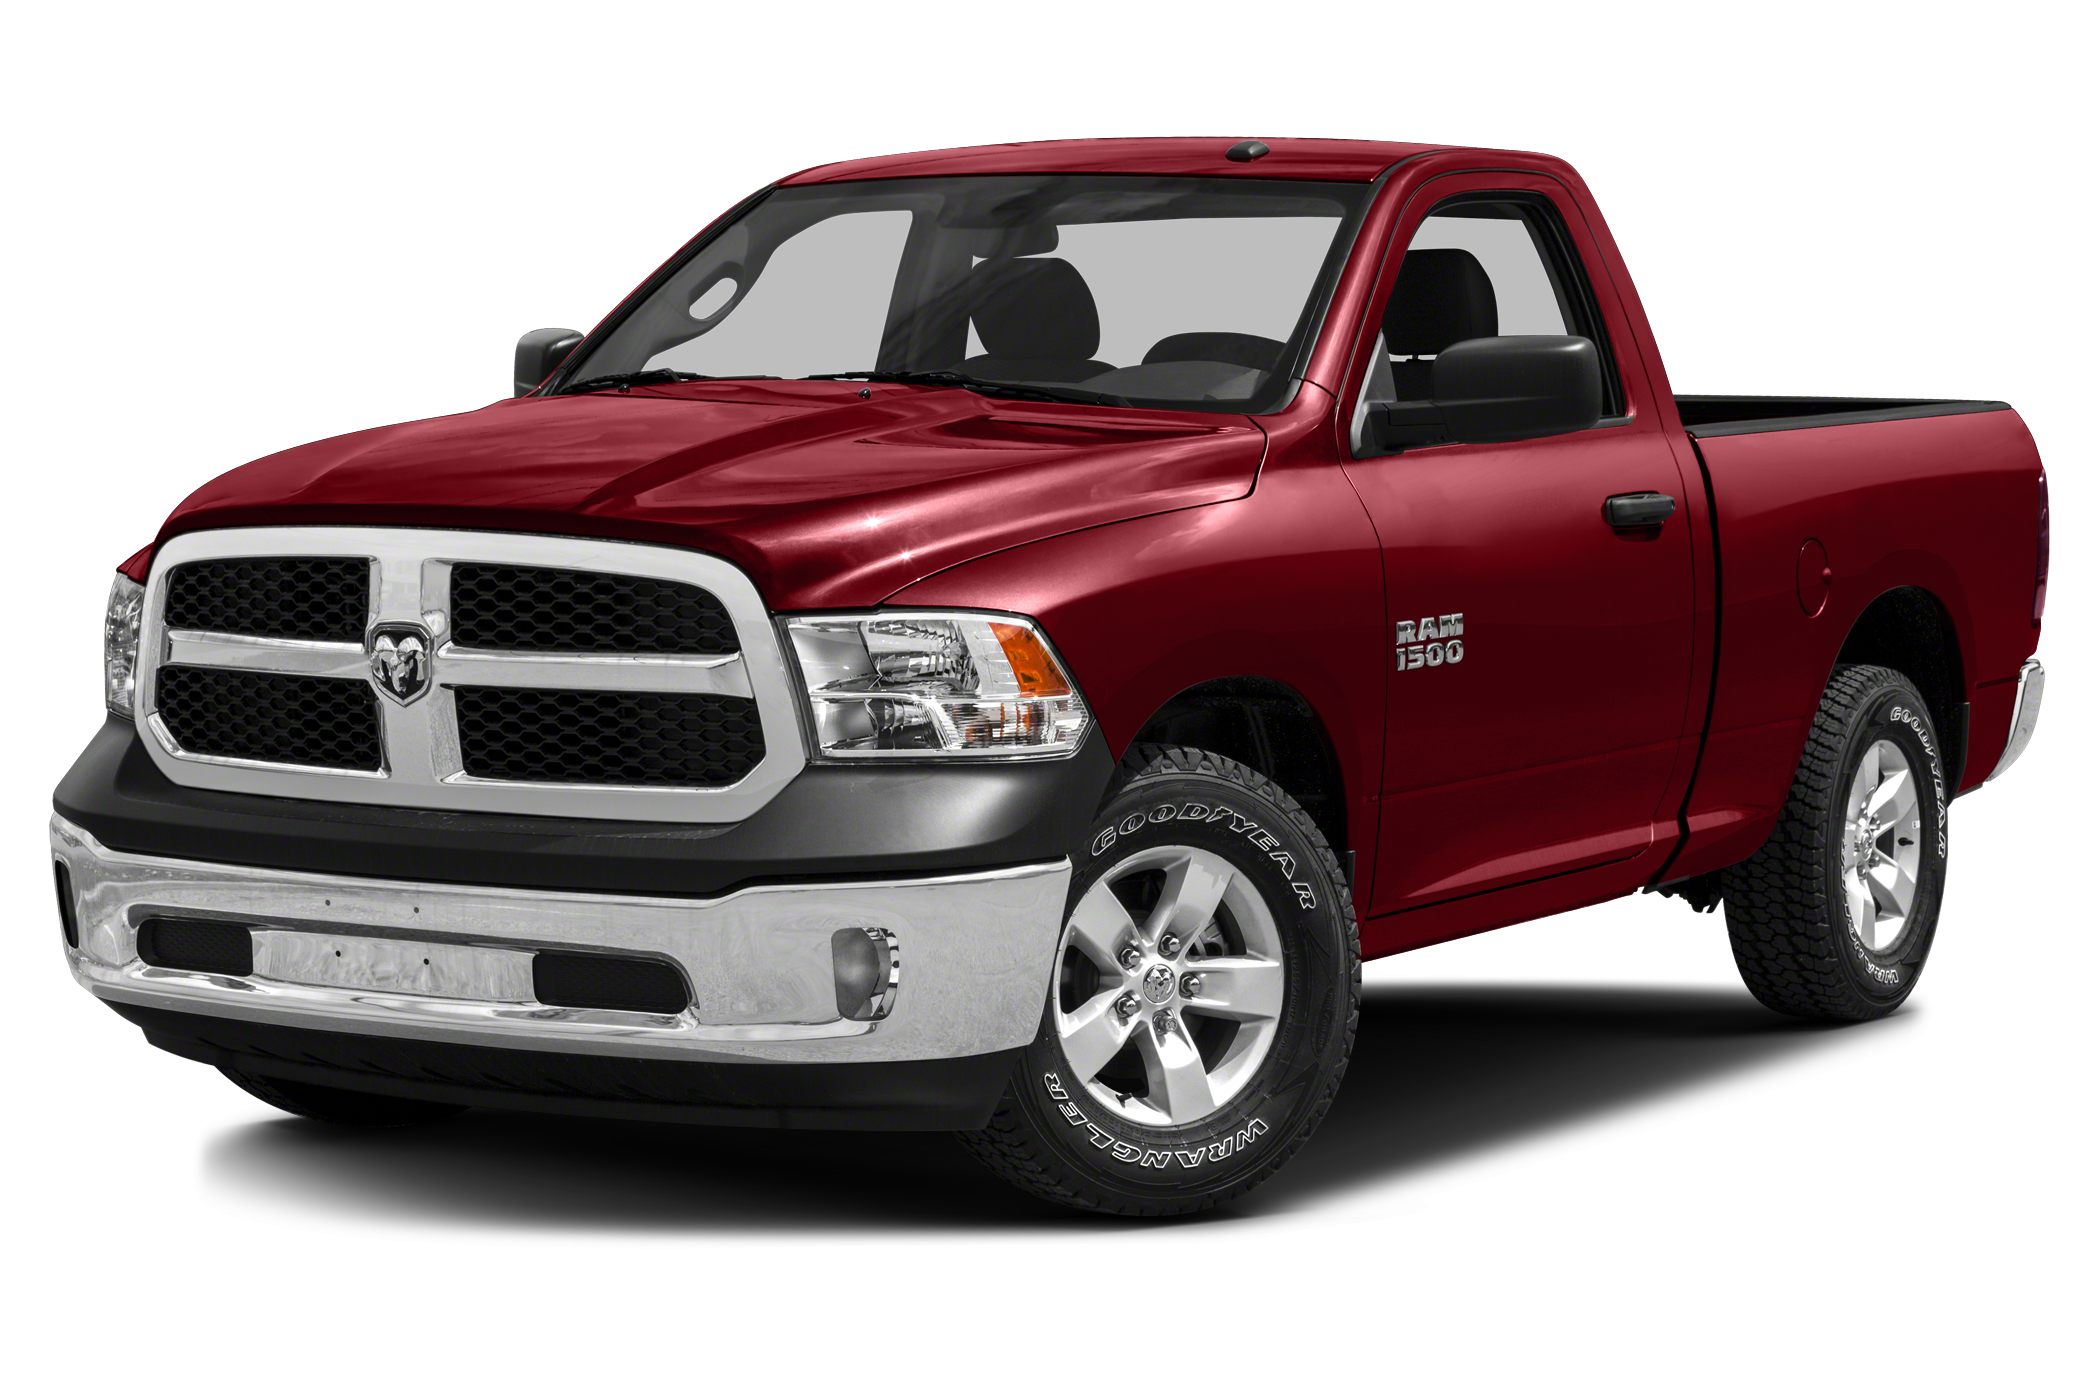 2013 Ram 1500 Specs And Prices